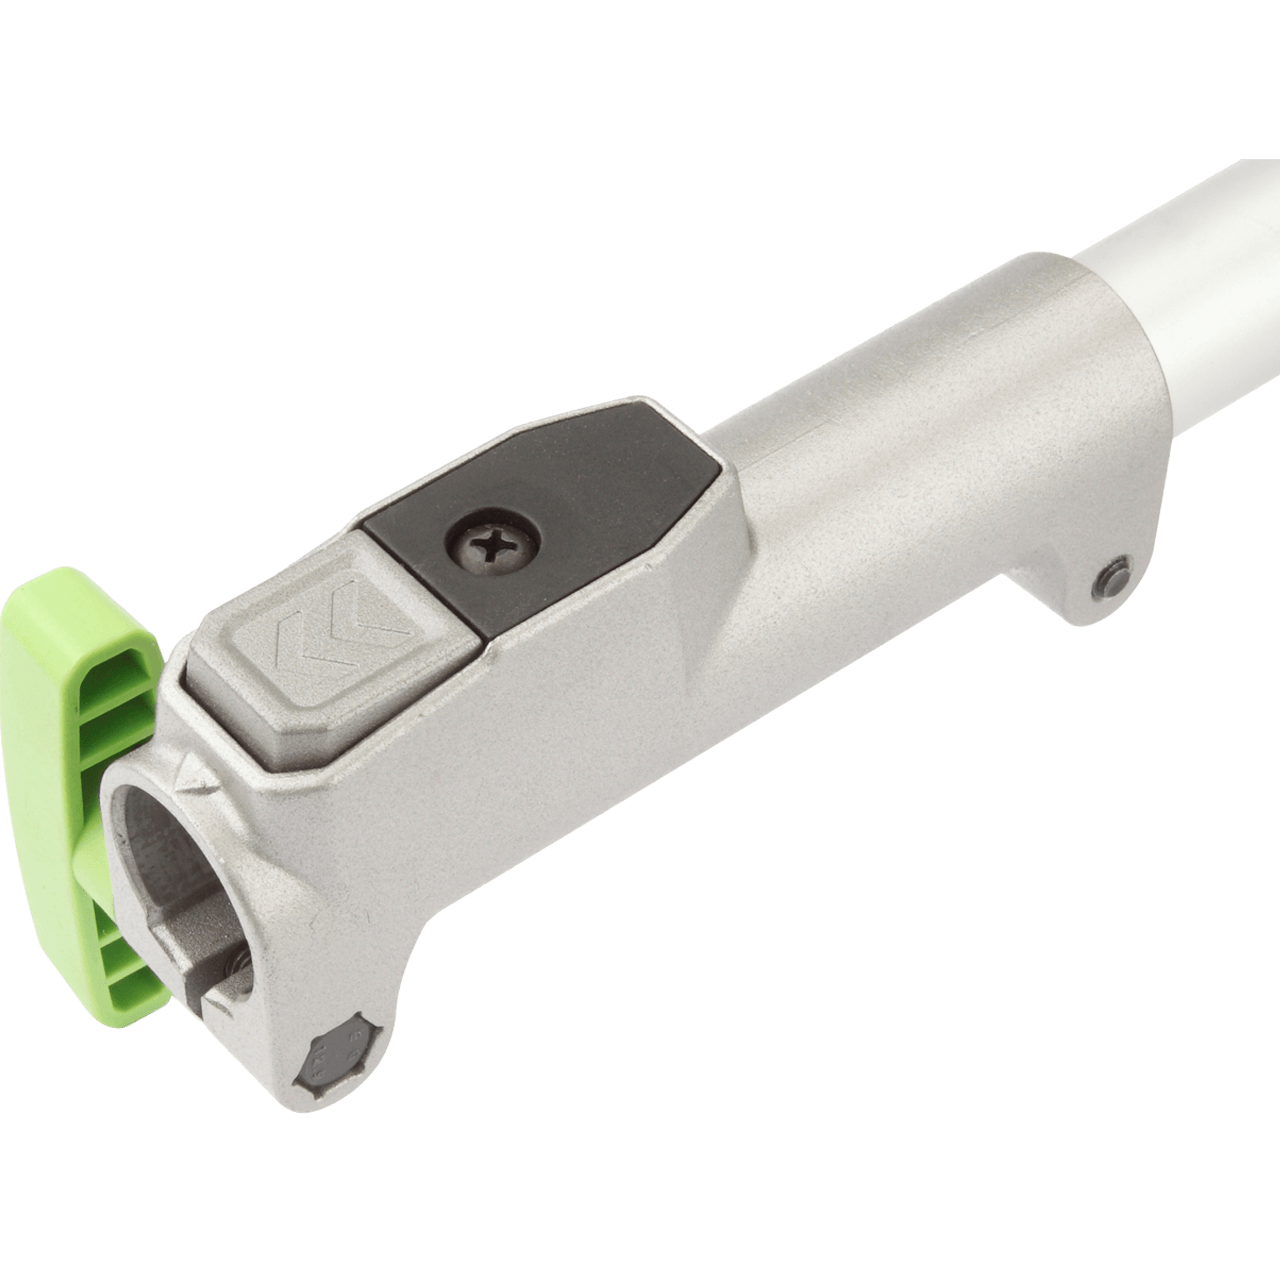 Tool free connector